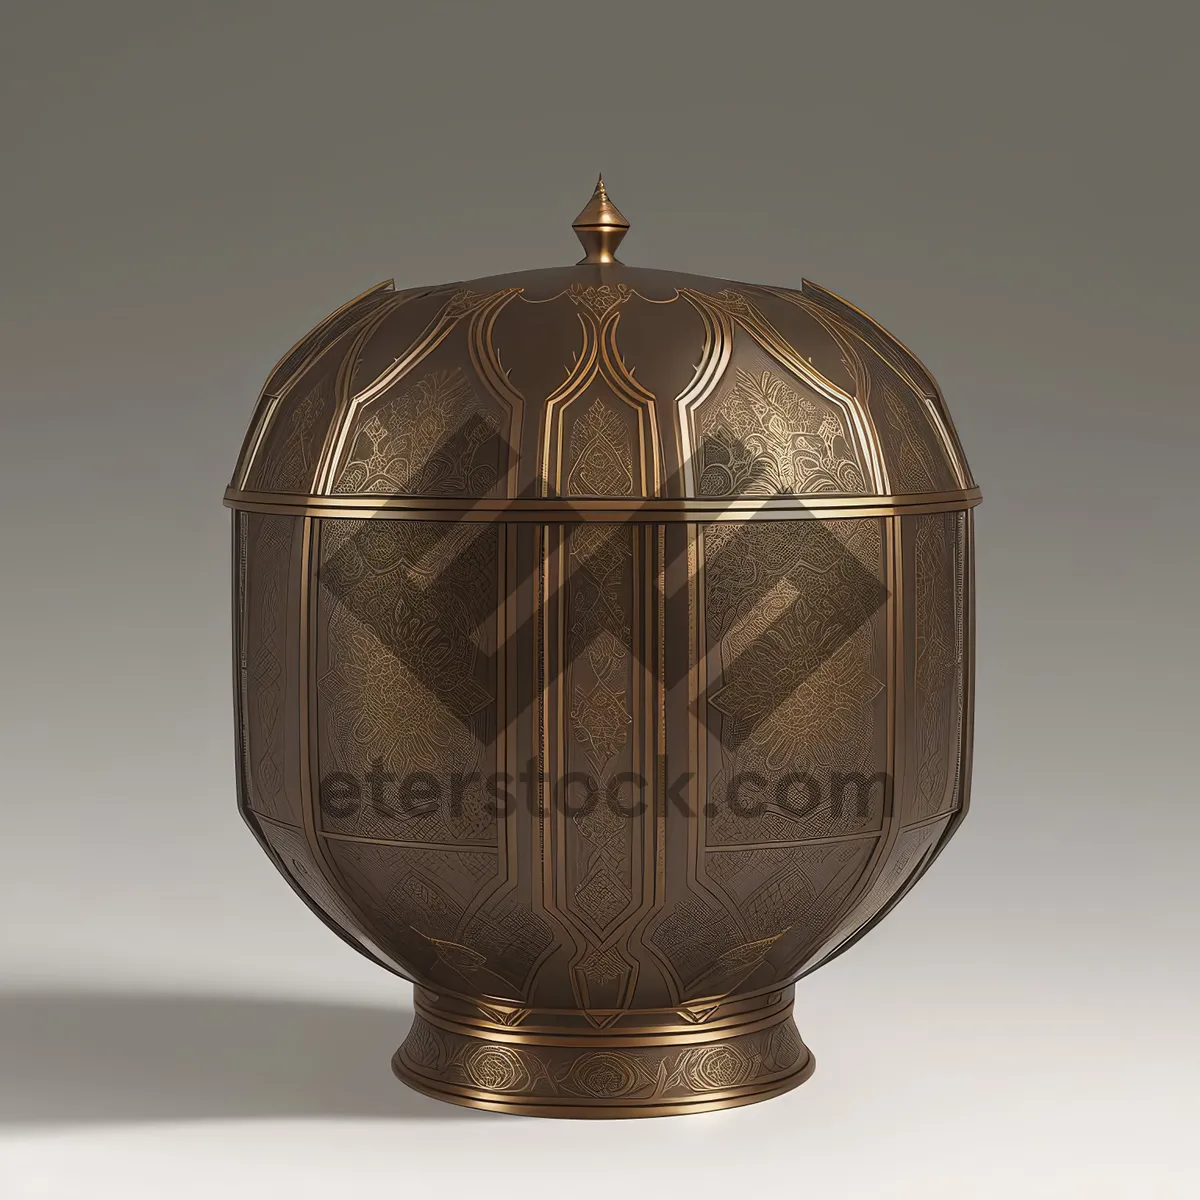 Picture of Golden Domed Palace with Ornate Table Lamp